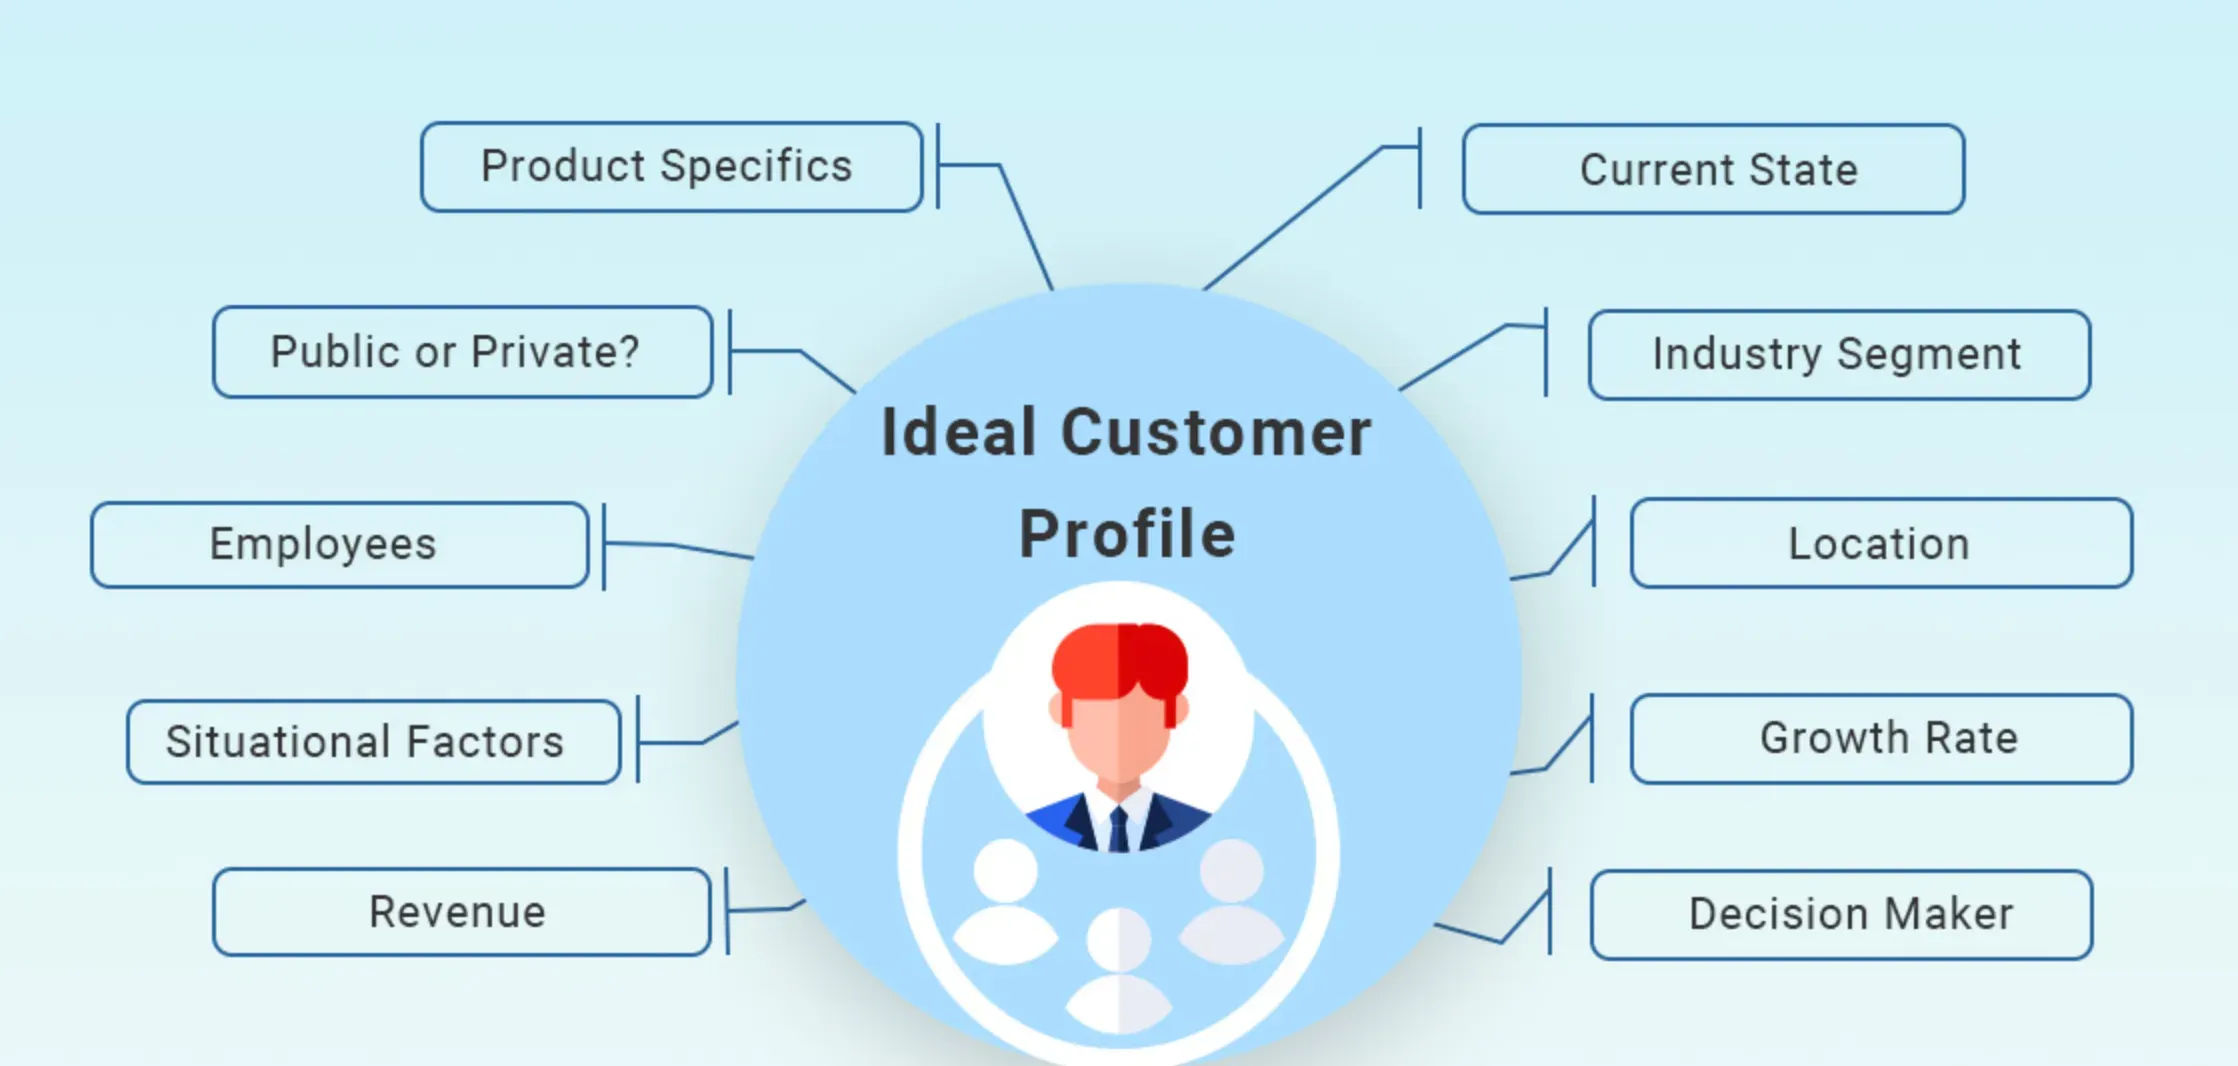 Alignment with Ideal Customer Profile (ICP)